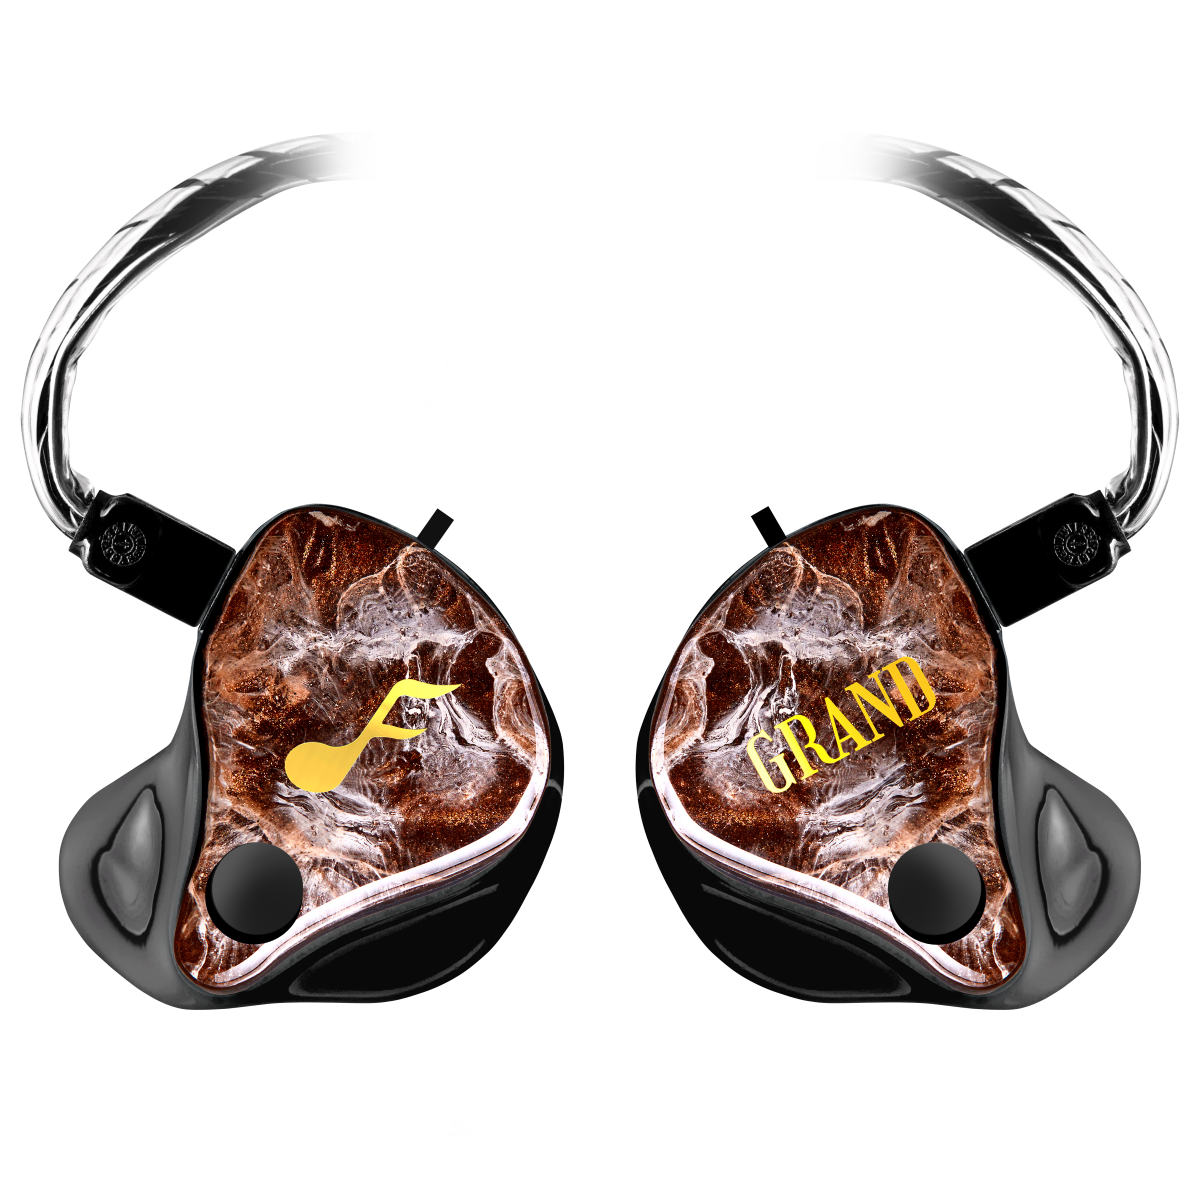 GRAND Maestro Custom IEM - Prices from 5391.00 to 5485.00